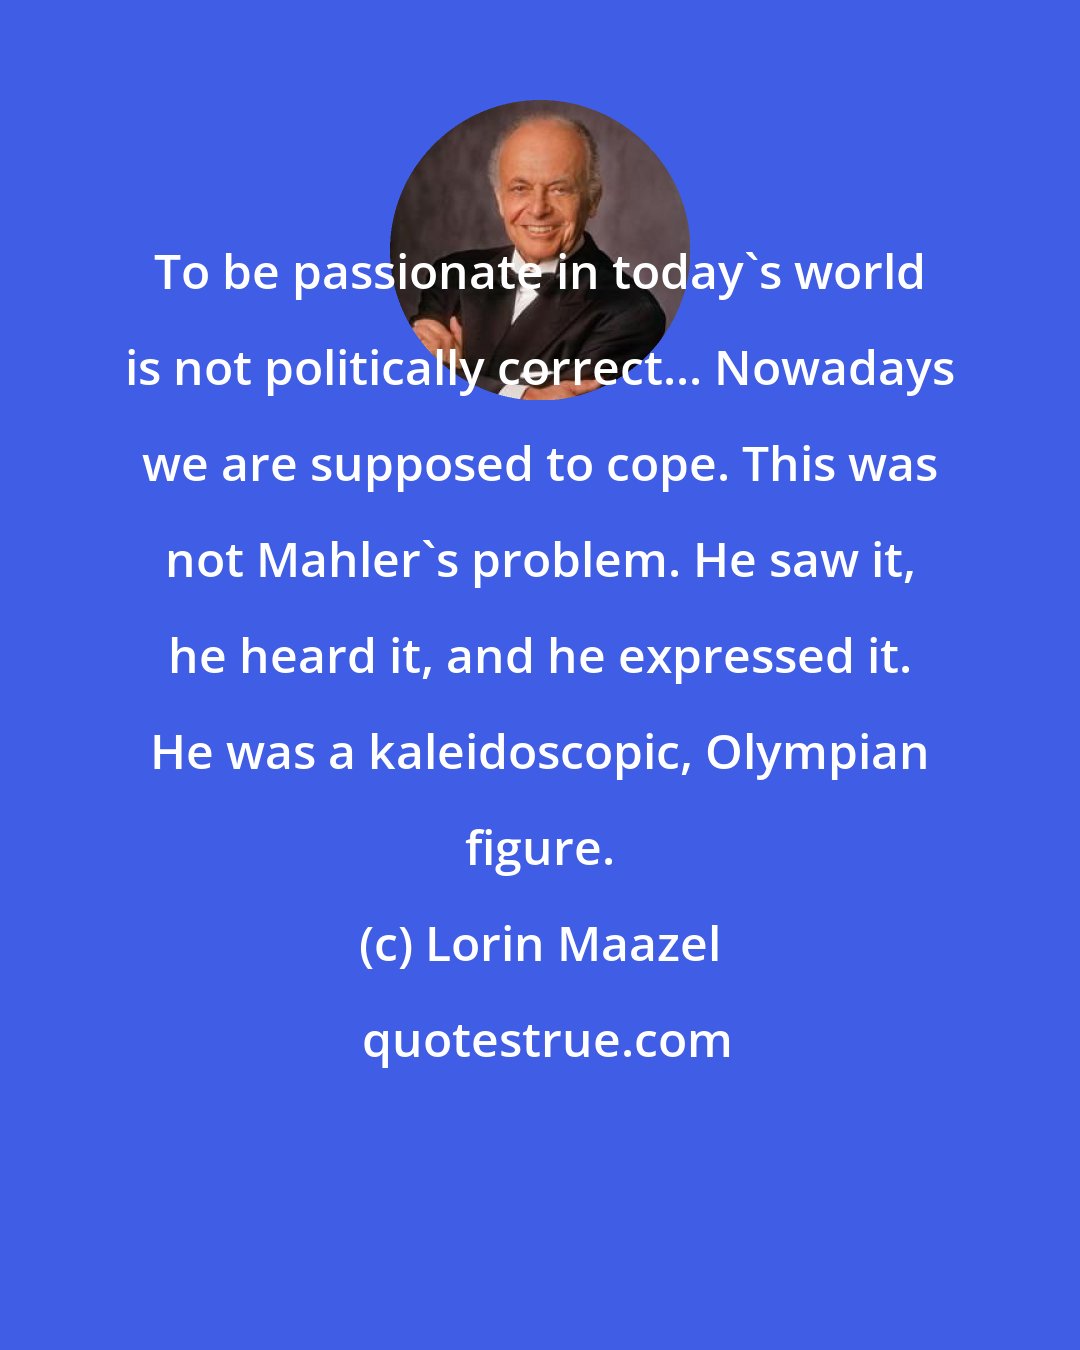 Lorin Maazel: To be passionate in today's world is not politically correct... Nowadays we are supposed to cope. This was not Mahler's problem. He saw it, he heard it, and he expressed it. He was a kaleidoscopic, Olympian figure.